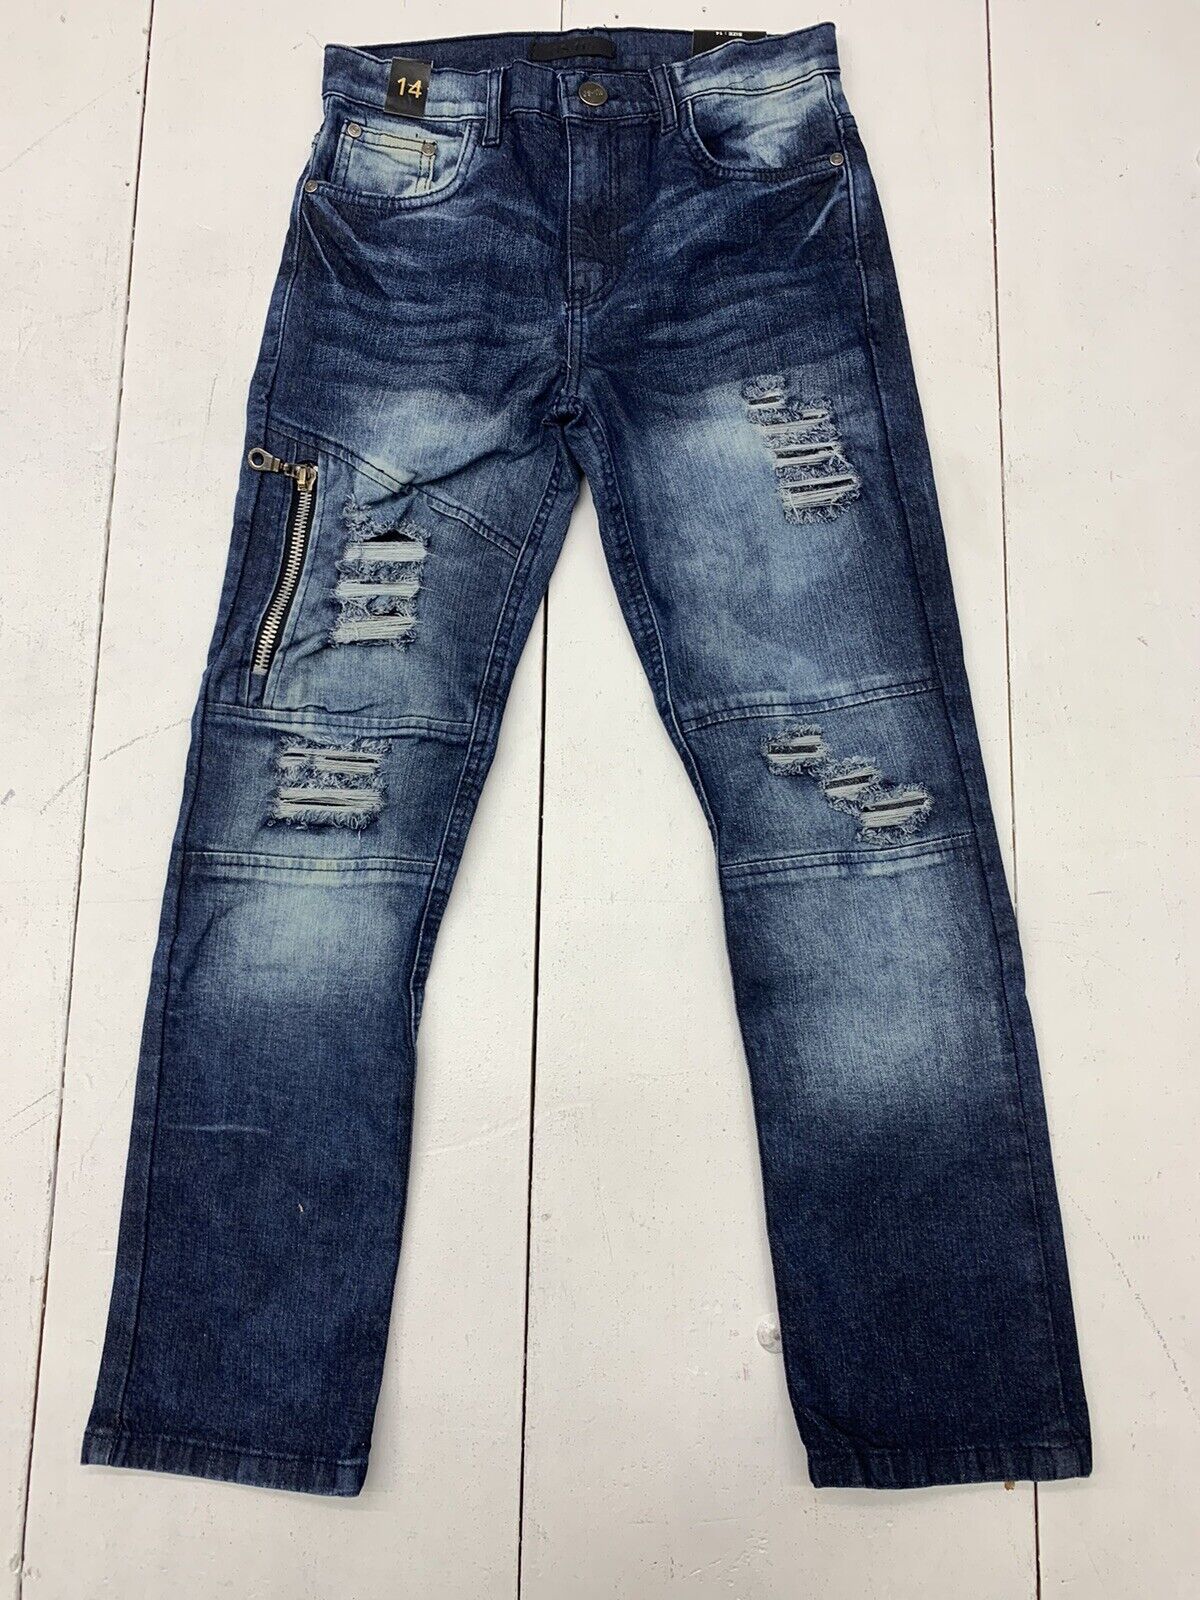 GS 115 Boys Blue Distressed Jeans Size 14